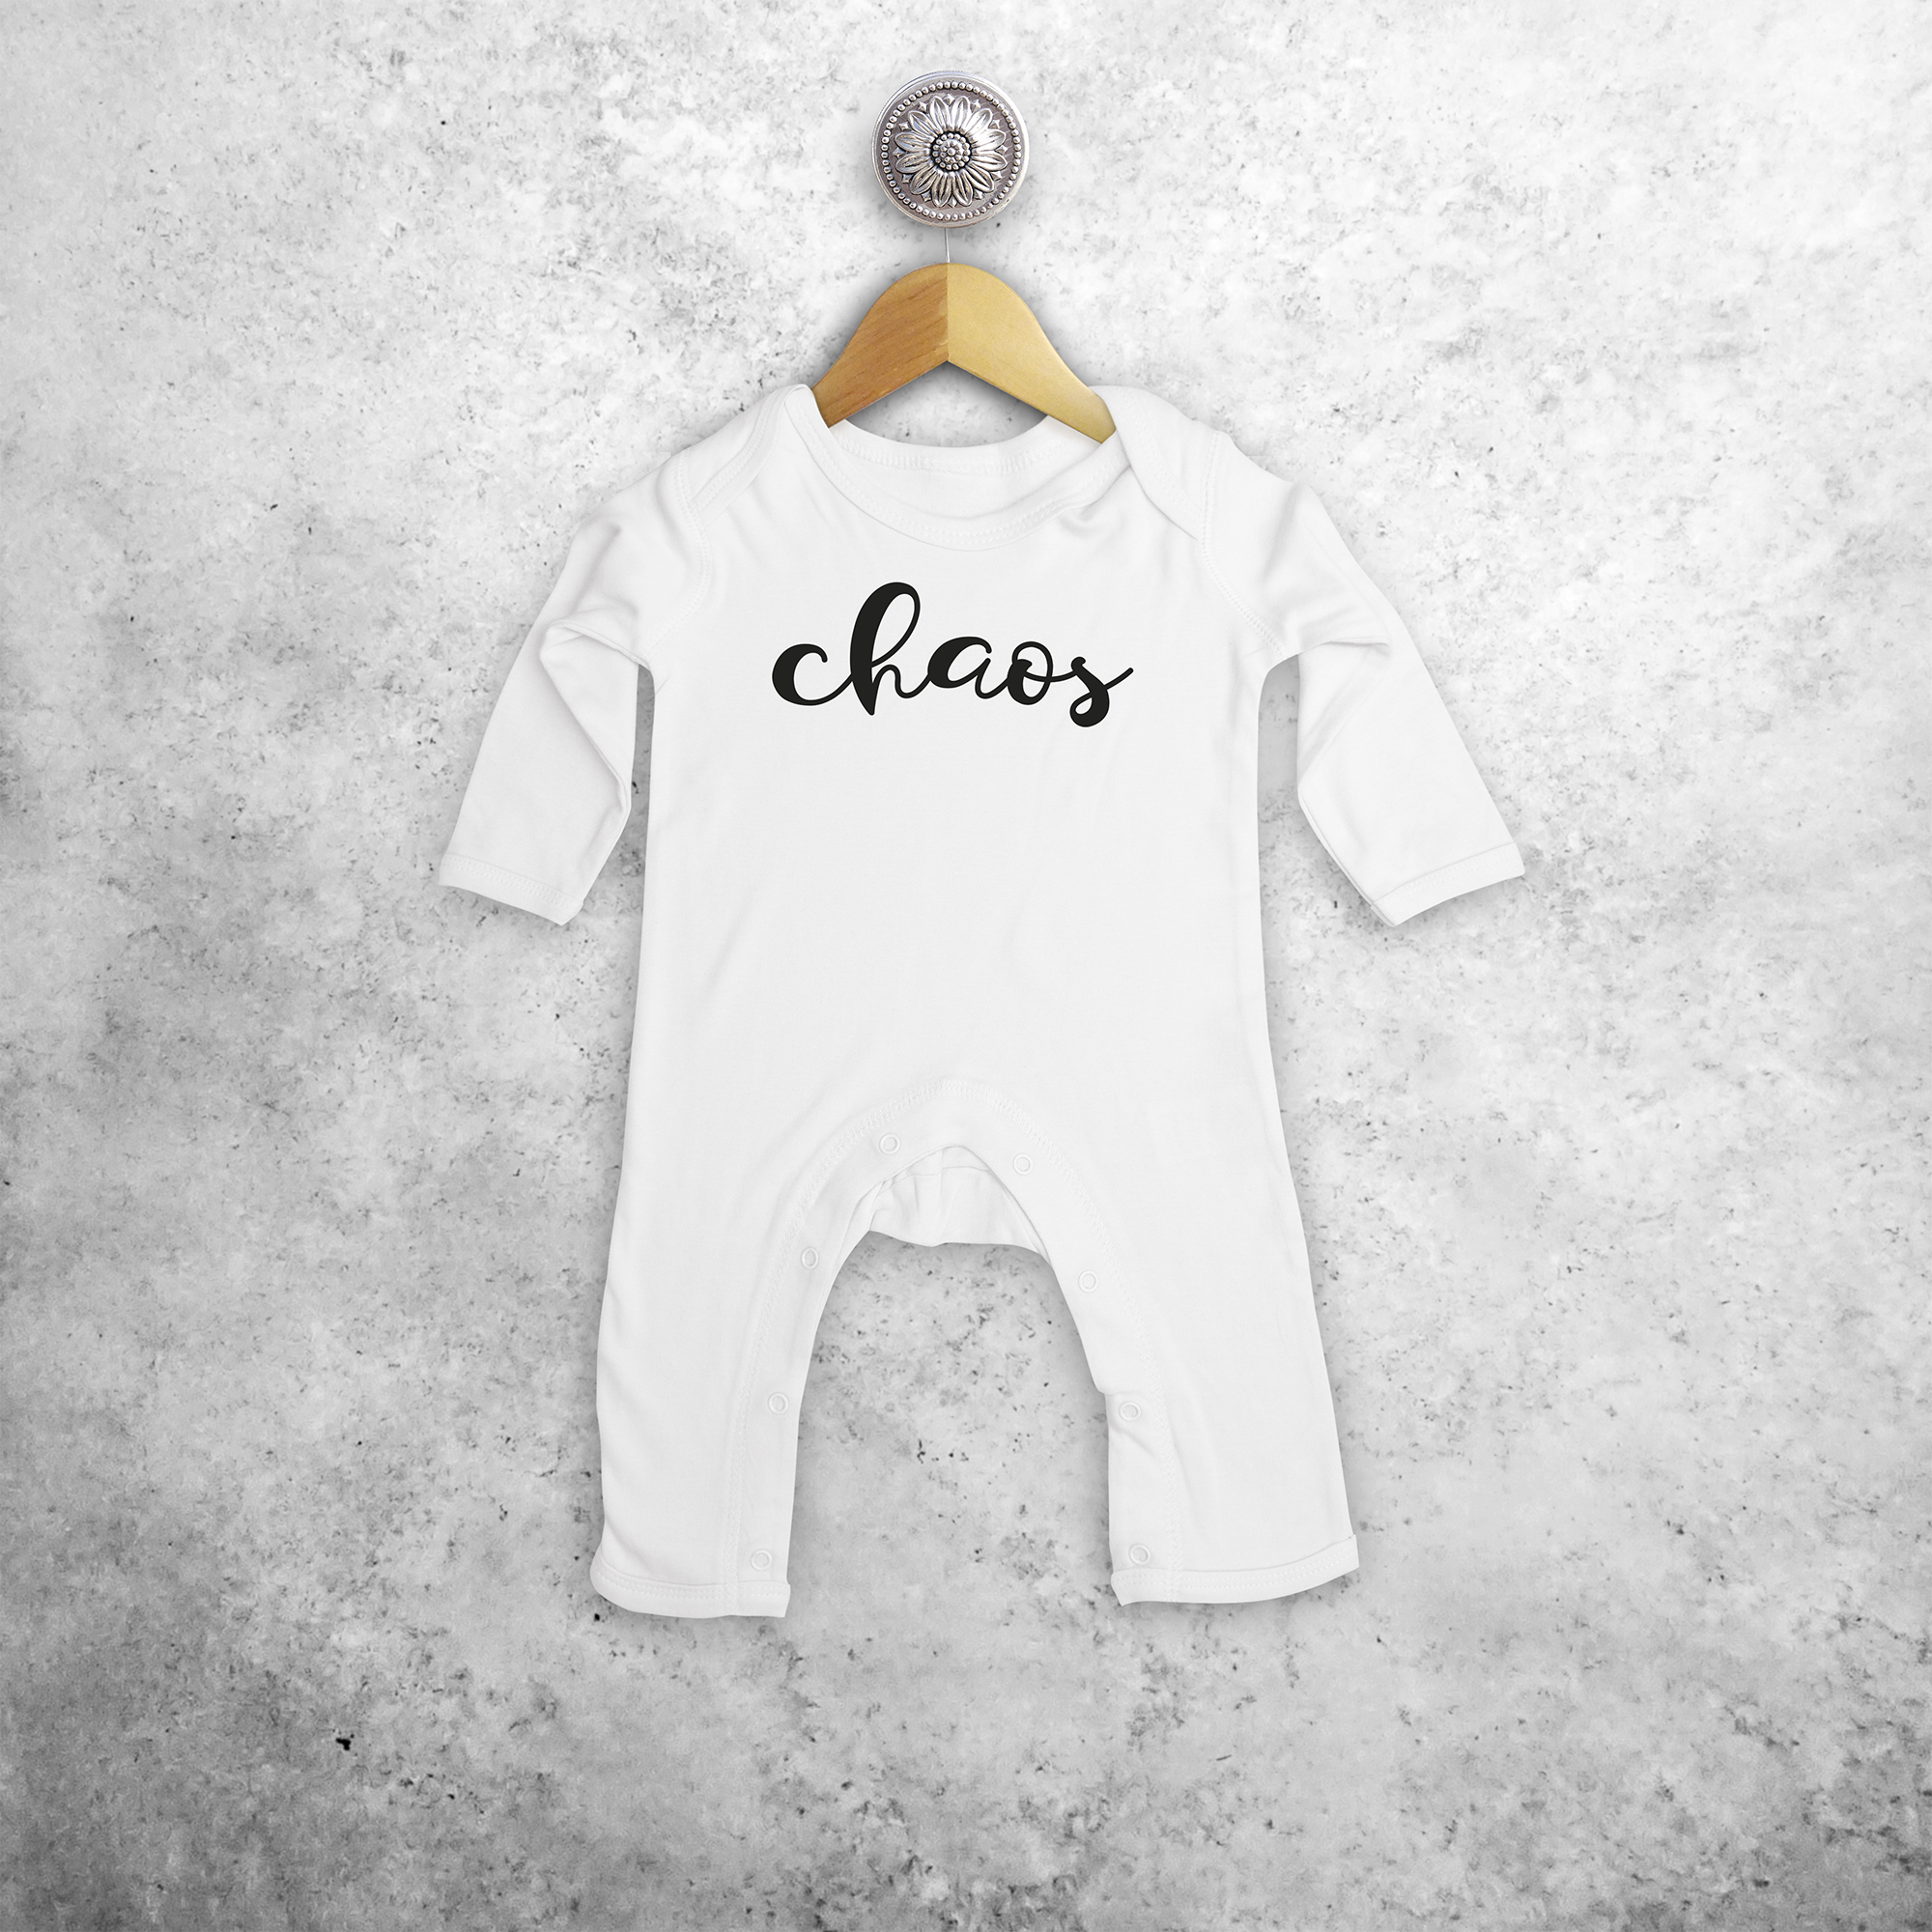 'Chaos' baby romper